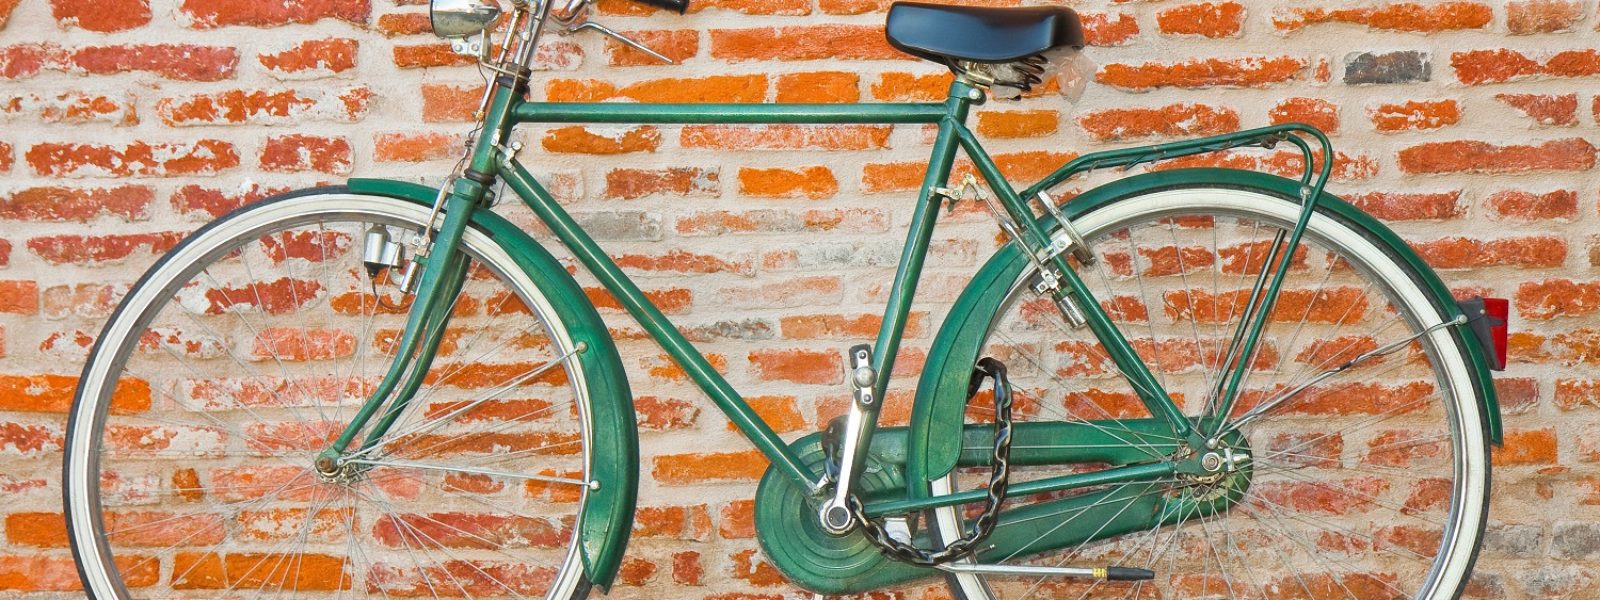 AdobeStock_220772261_Old green bicycle parked against a brick wall